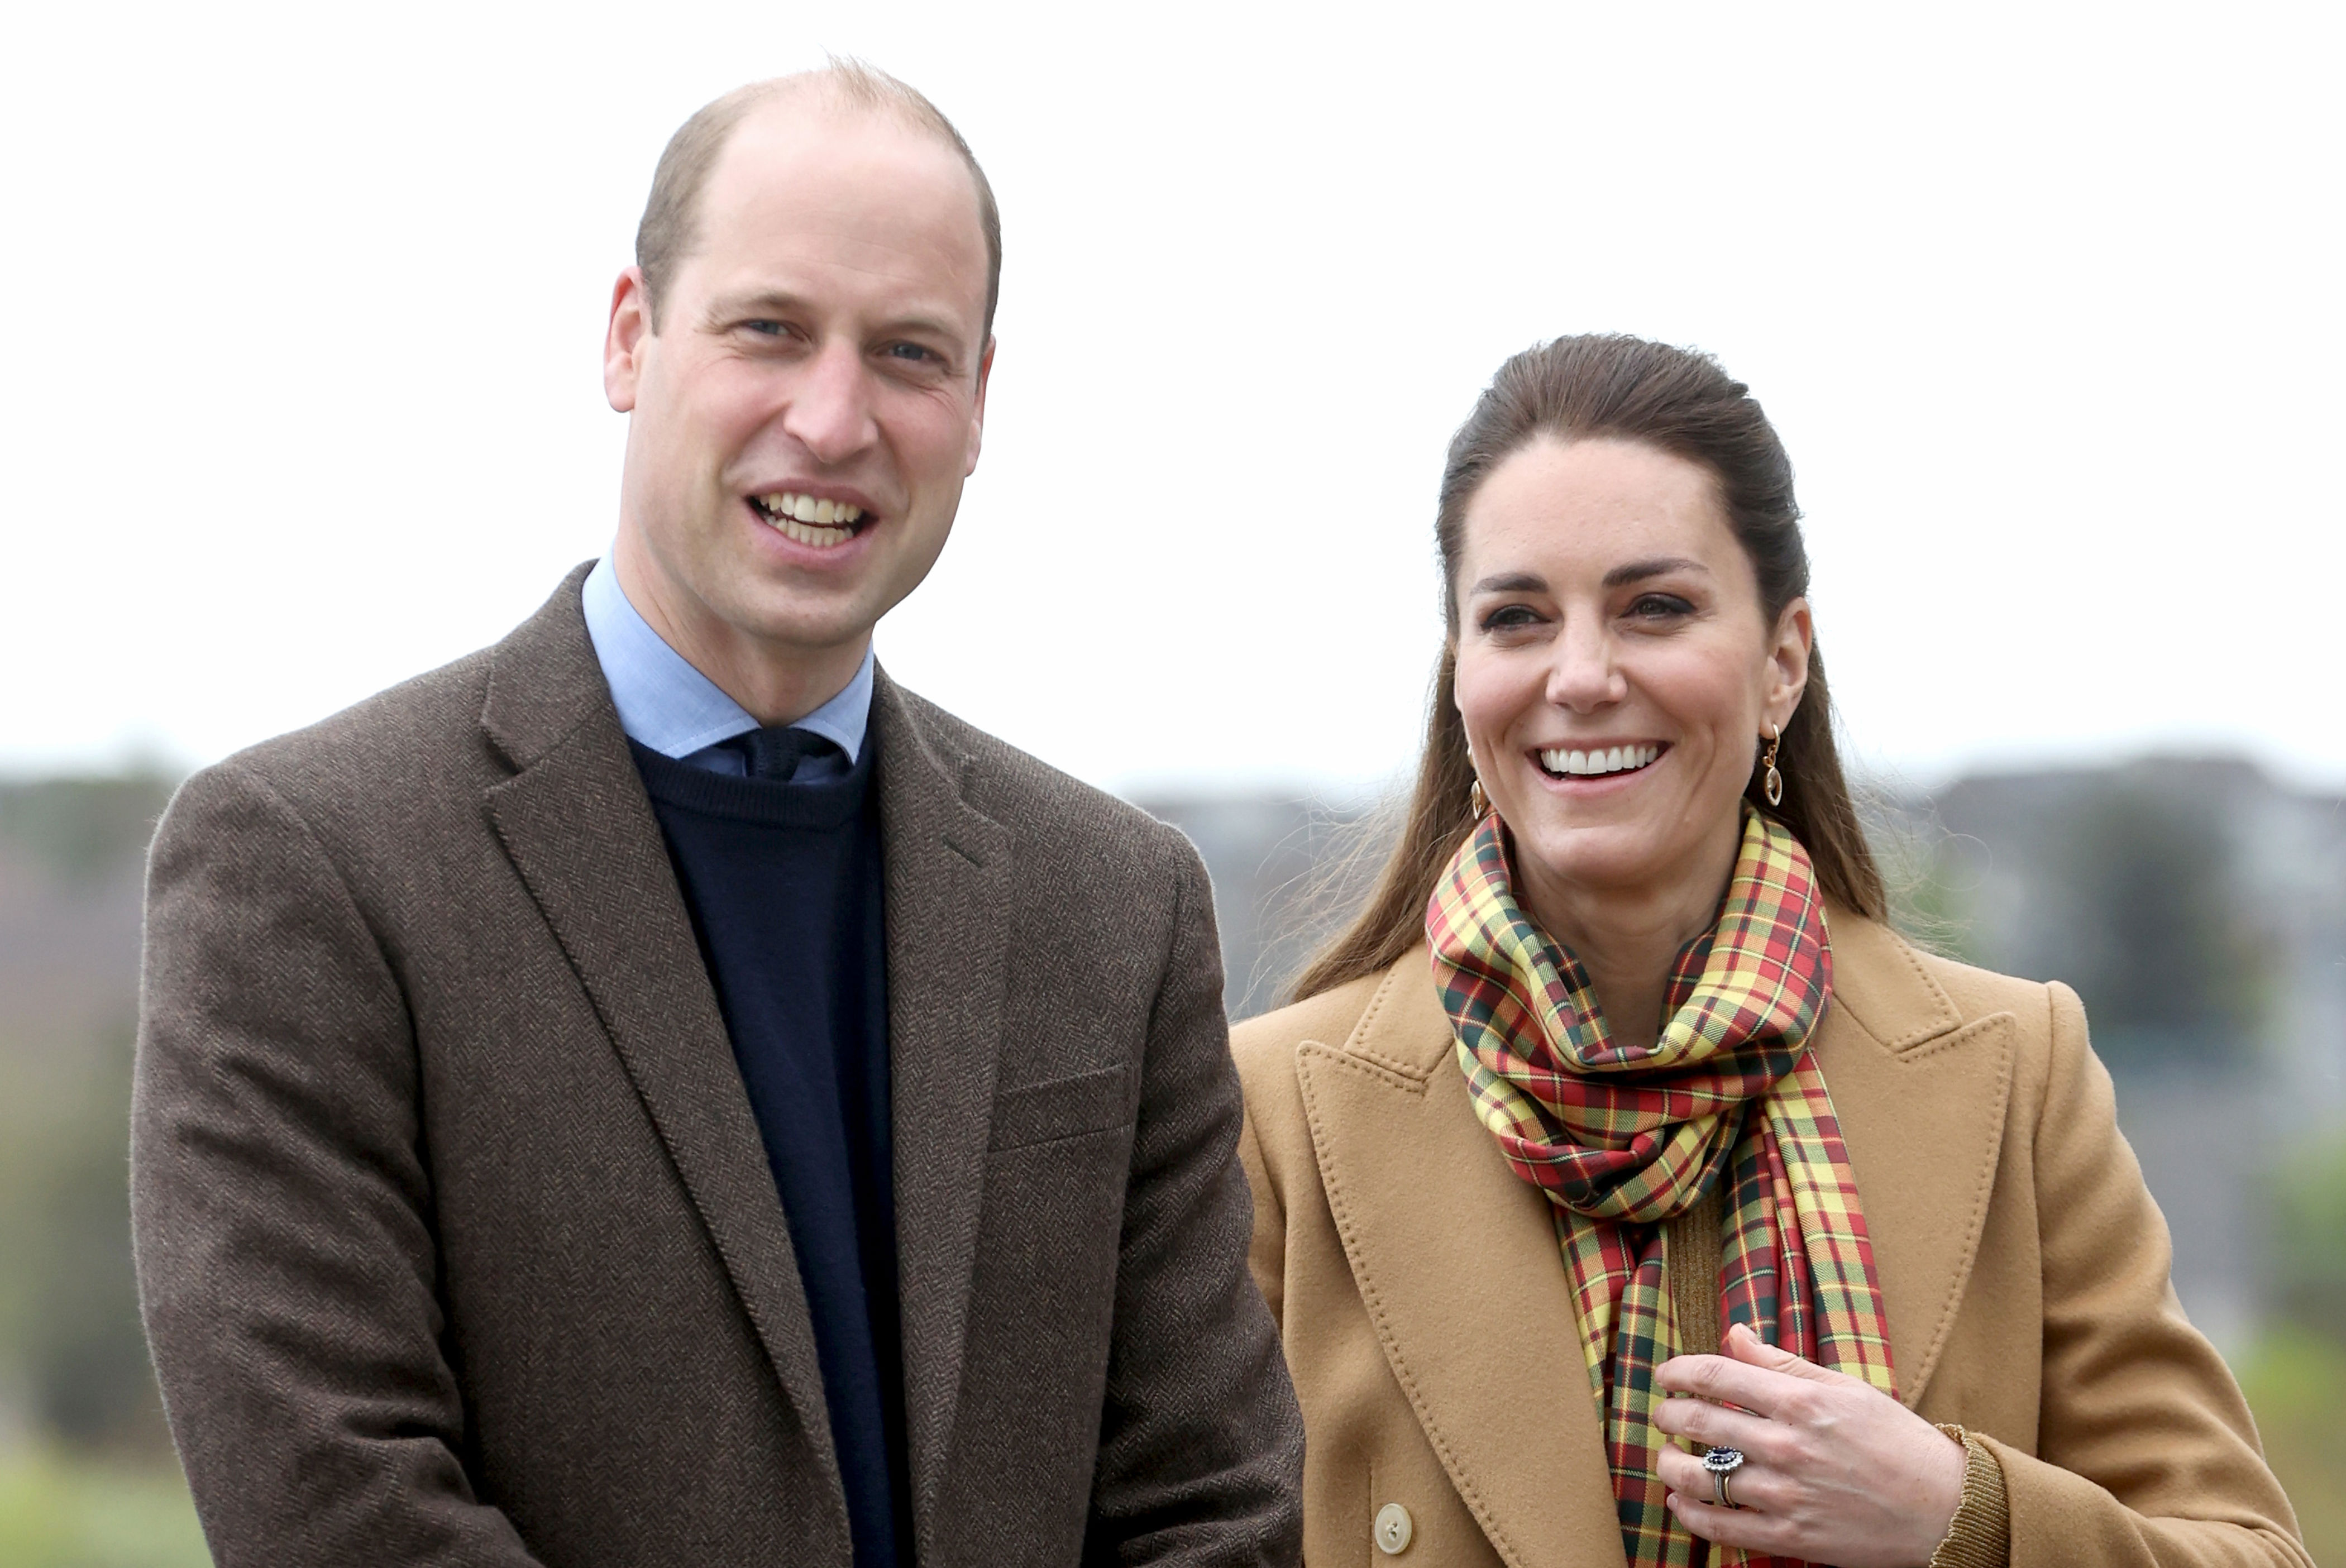 <p><a href="https://www.wonderwall.com/celebrity/profiles/overview/prince-william-482.article">Prince William</a> and <a href="https://www.wonderwall.com/celebrity/profiles/overview/duchess-kate-1356.article">Duchess Kate</a> arrived to officially open The Balfour, Orkney Hospital in Kirkwall, Scotland, on day five of their week-long visit to Scotland on May 25, 2021.</p>